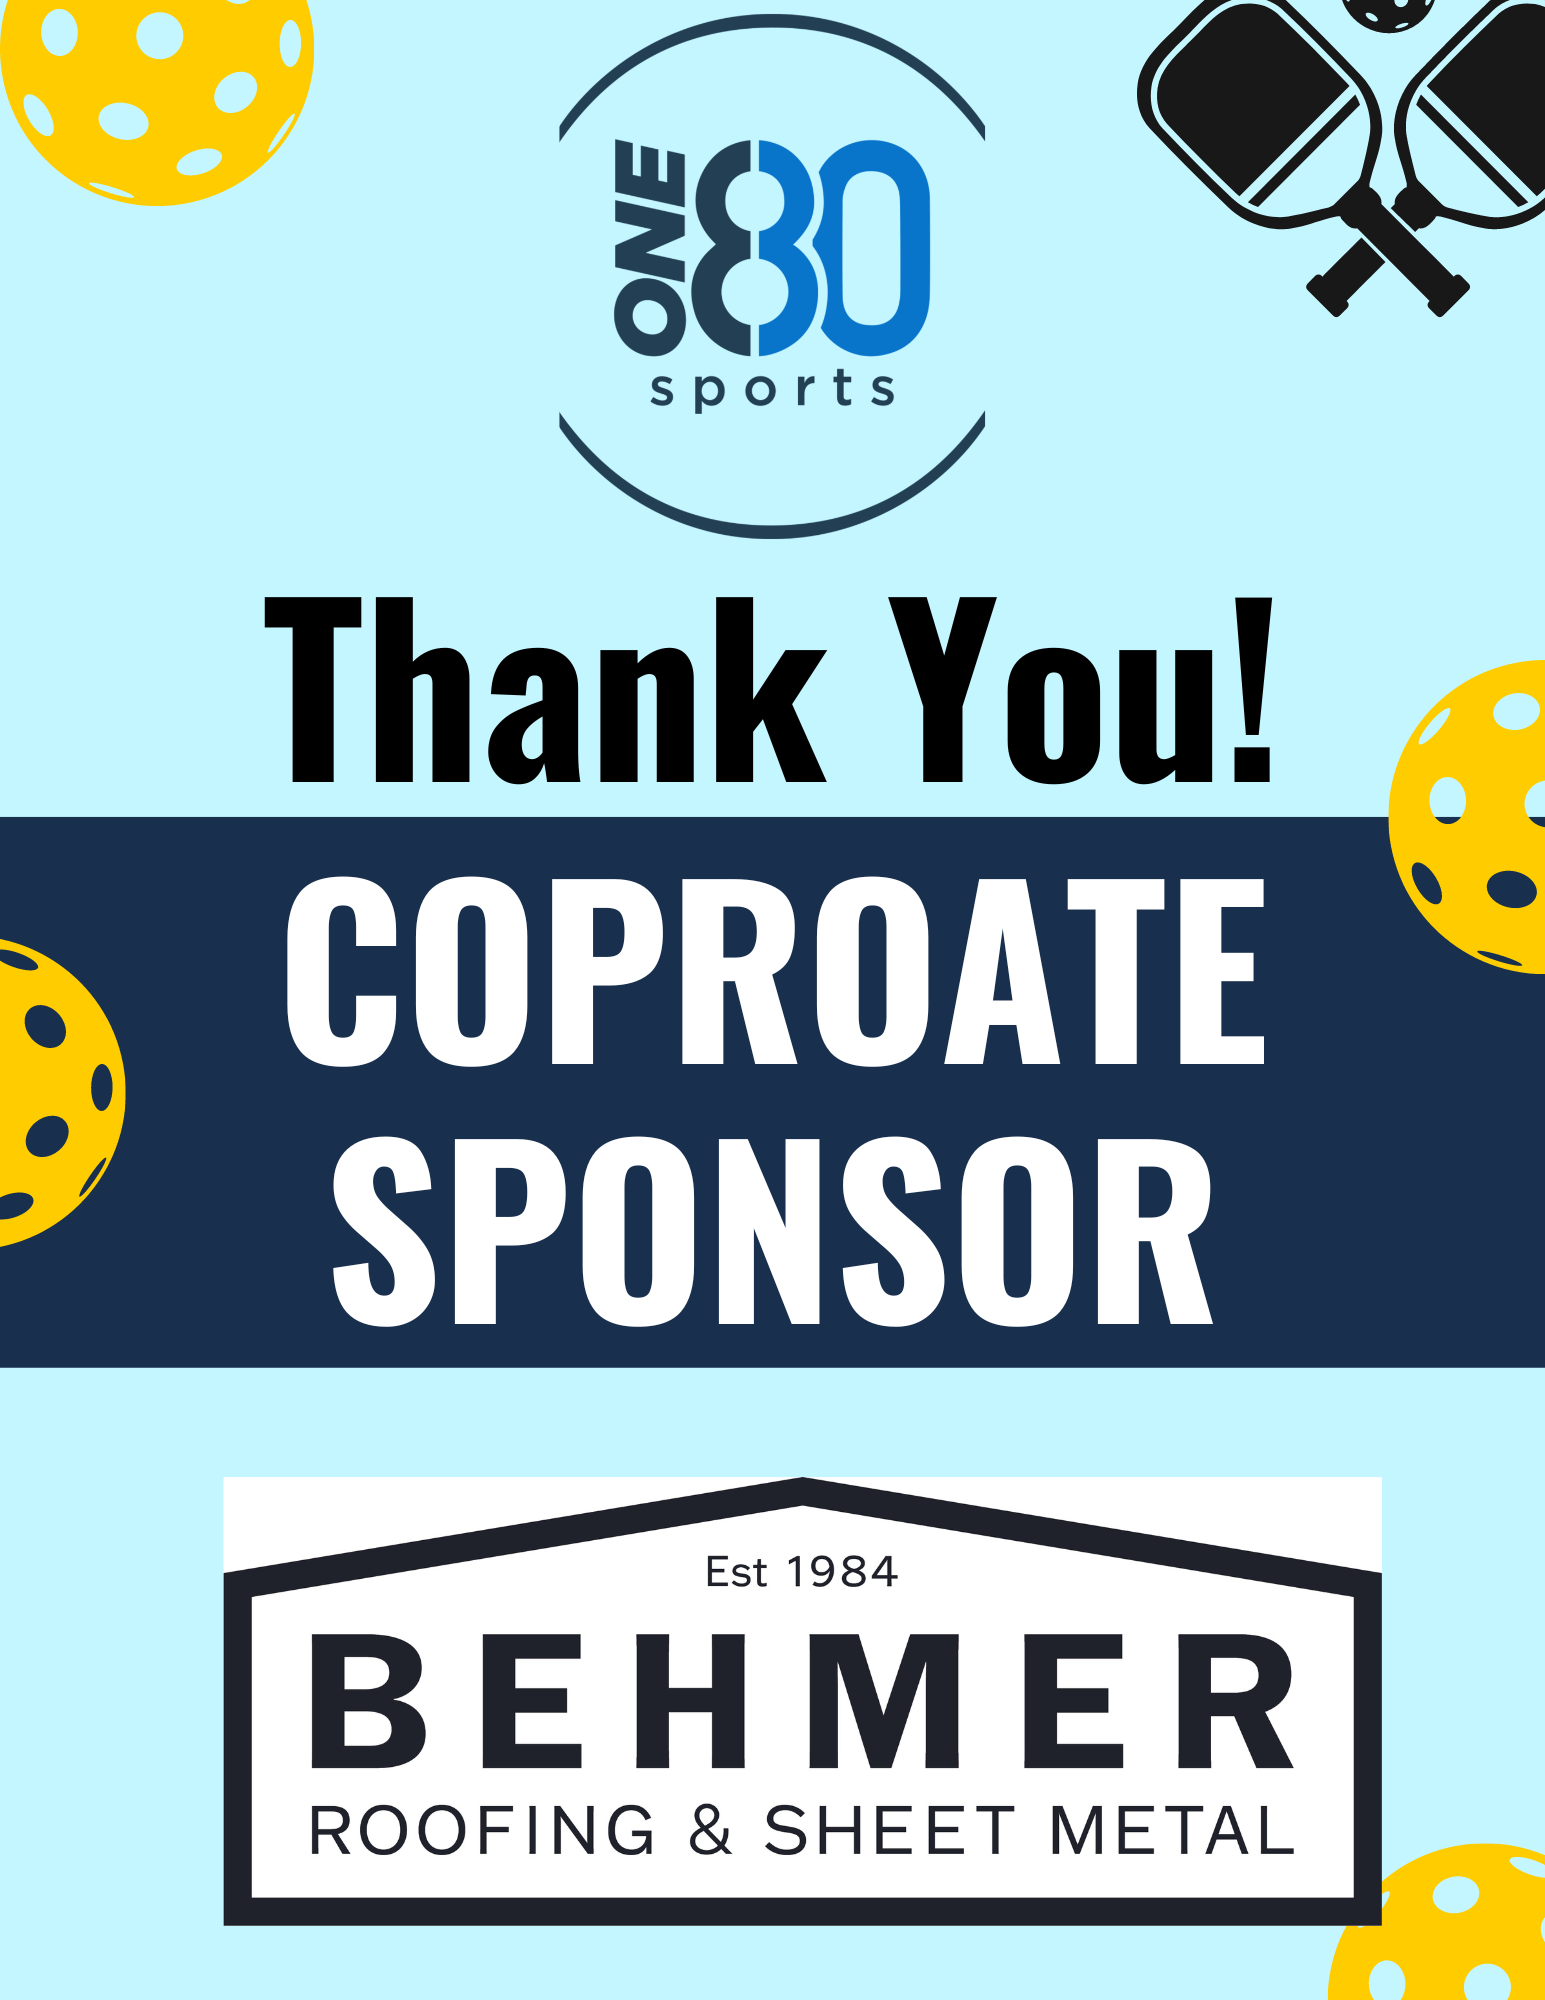 BEHMER ROOFING - CORPORATE SPONSOR.png